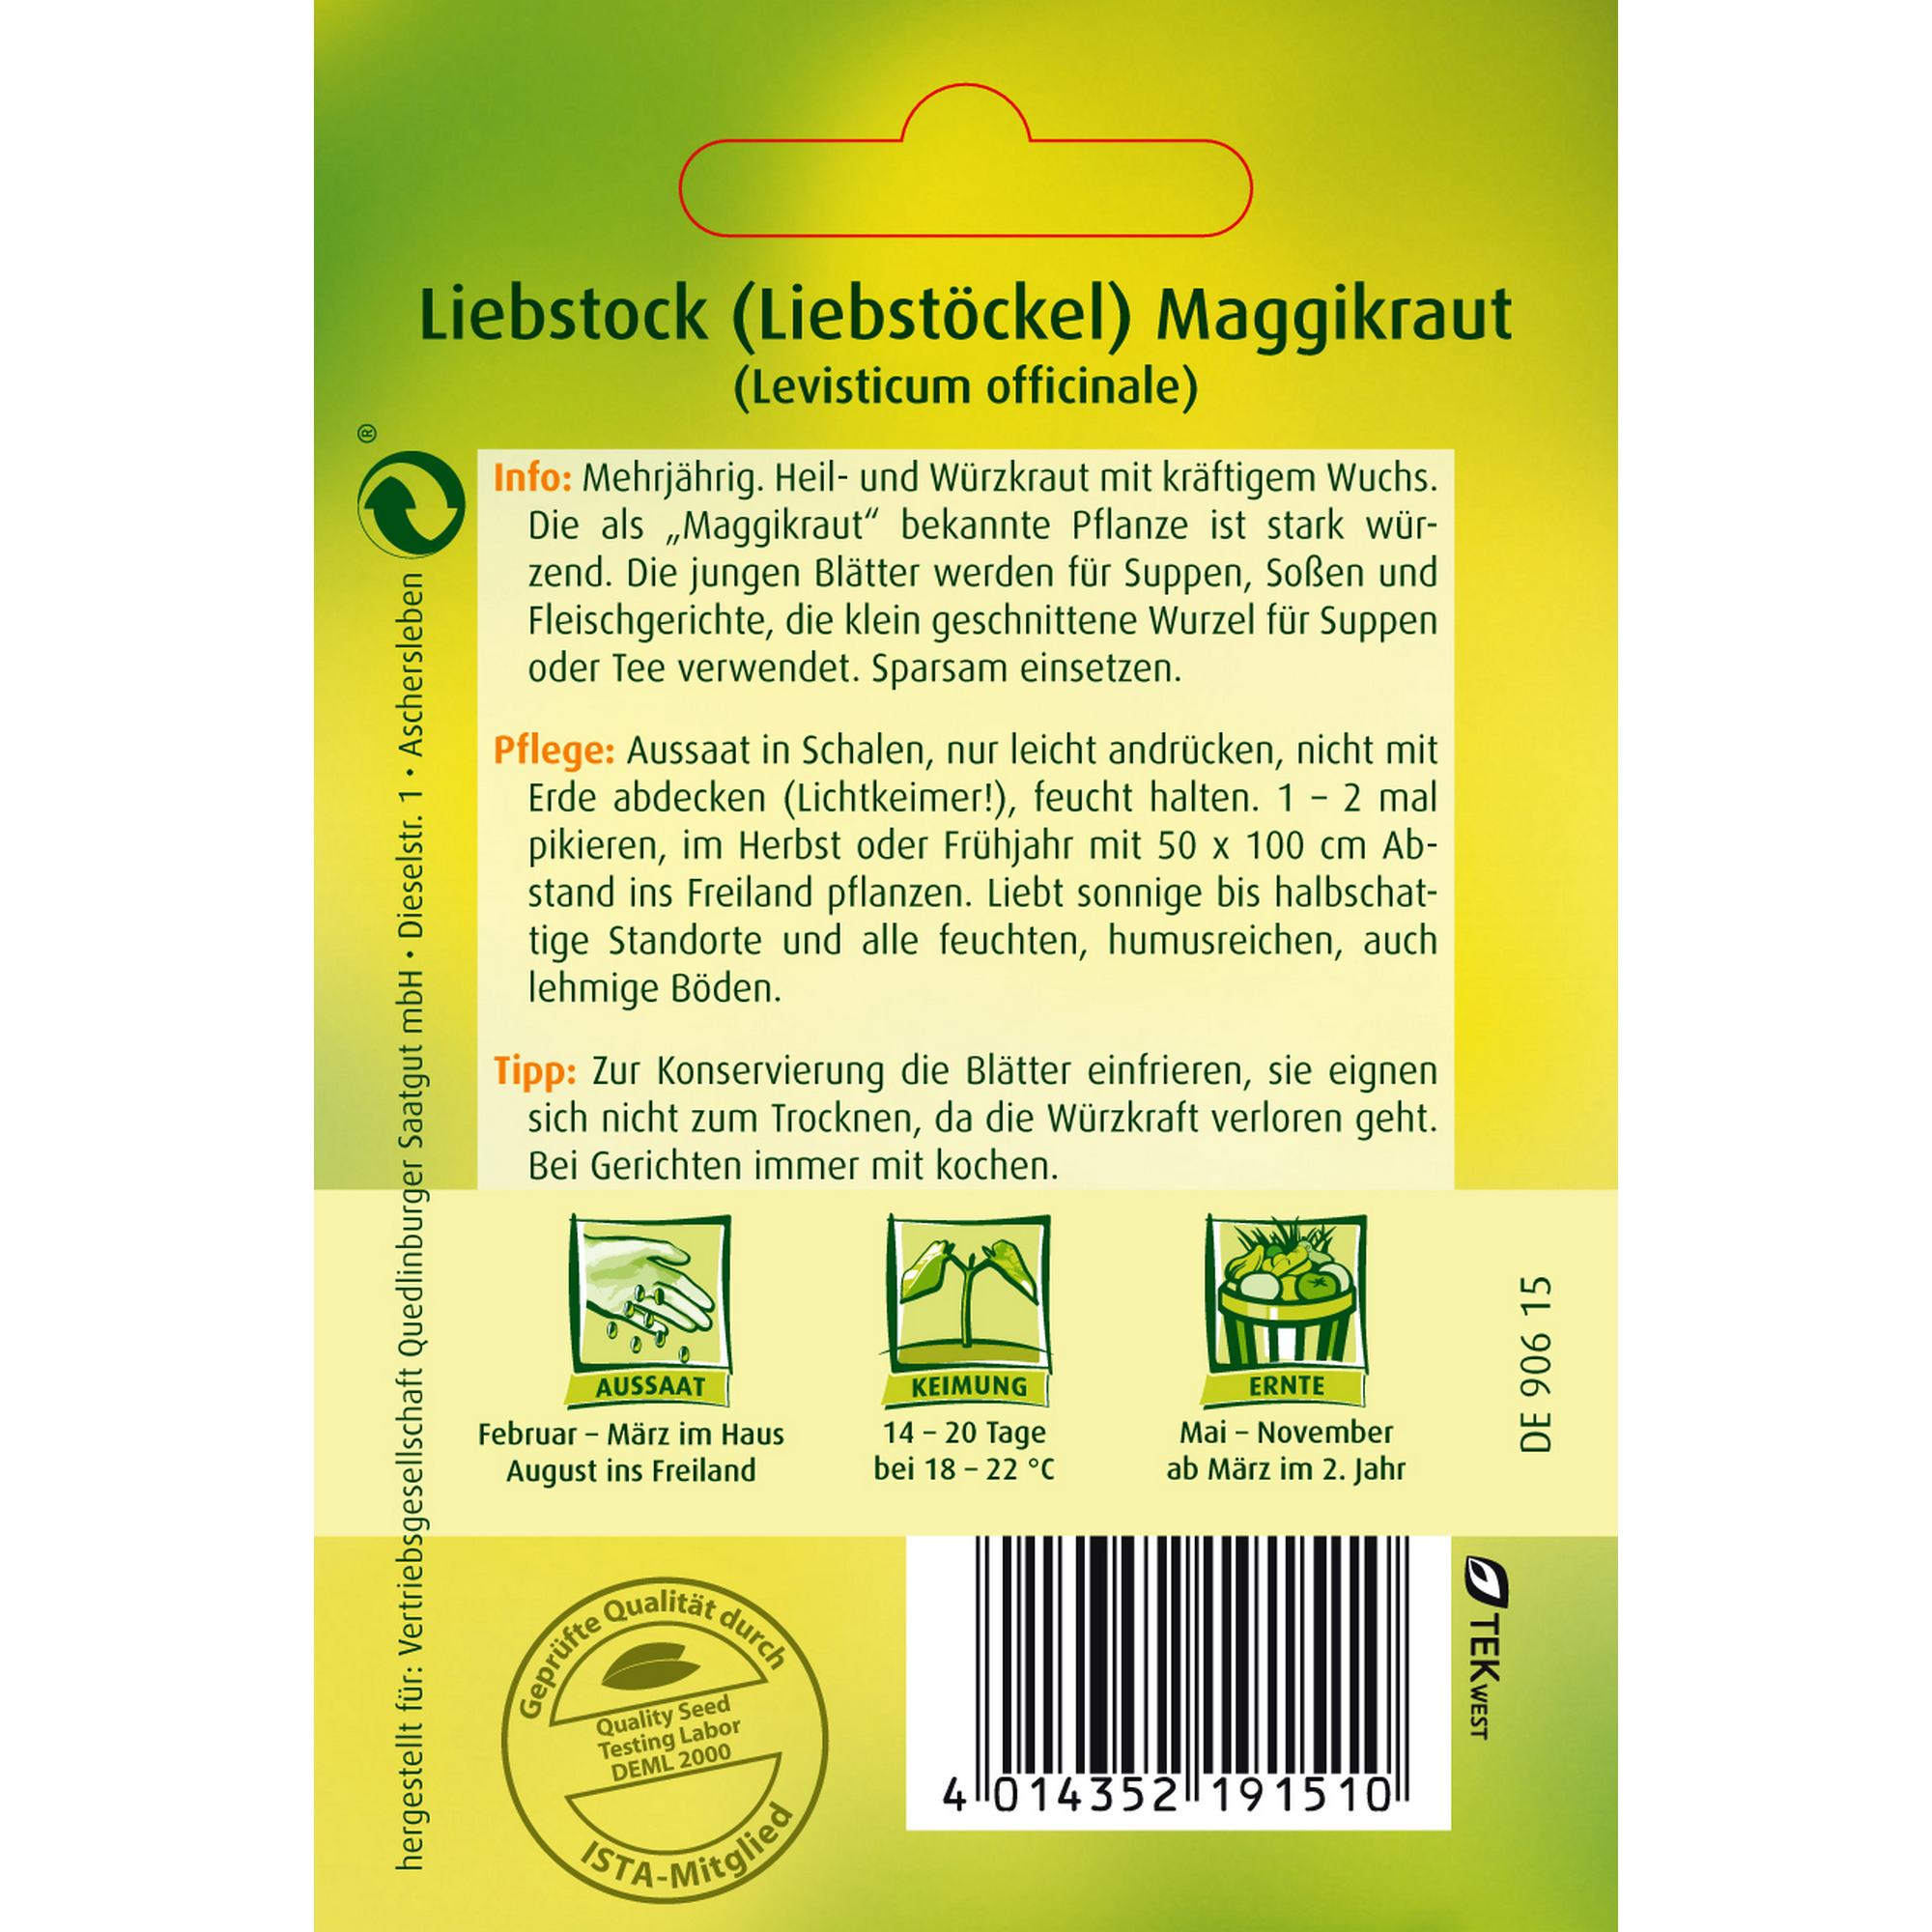 Liebstock Maggikraut + product picture